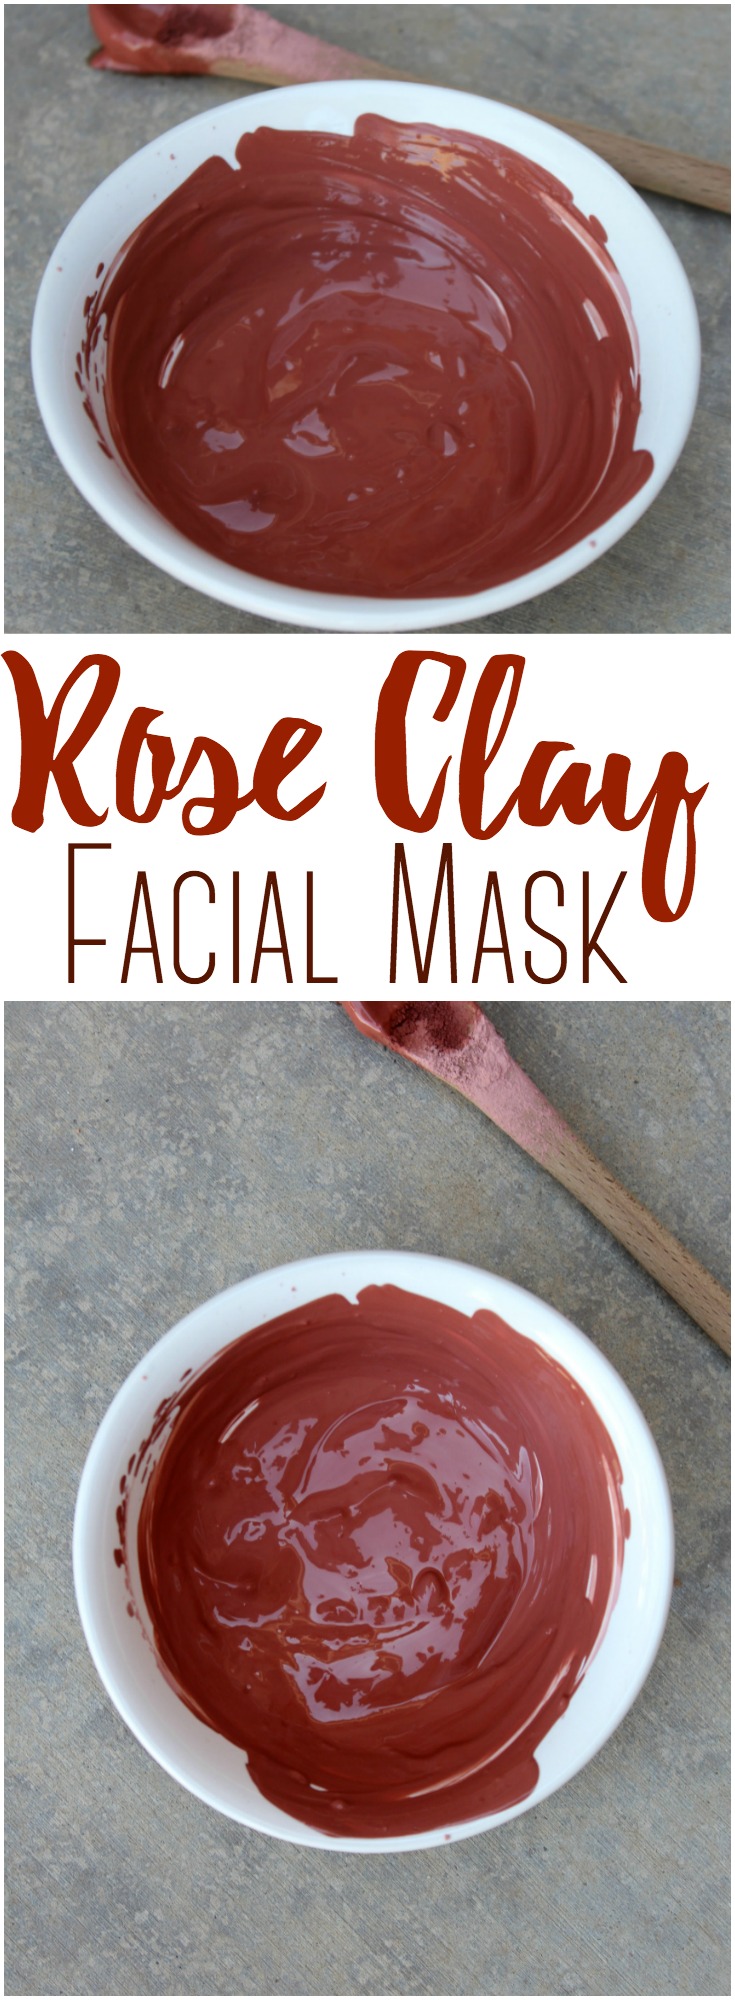 This easy rose clay facial mask is perfect for supporting healthy skin and a renewed complexion and is easy to put together!   #RoseClay #facialmask #naturalbeauty #kaolinclay #claymask #DIY #beauty